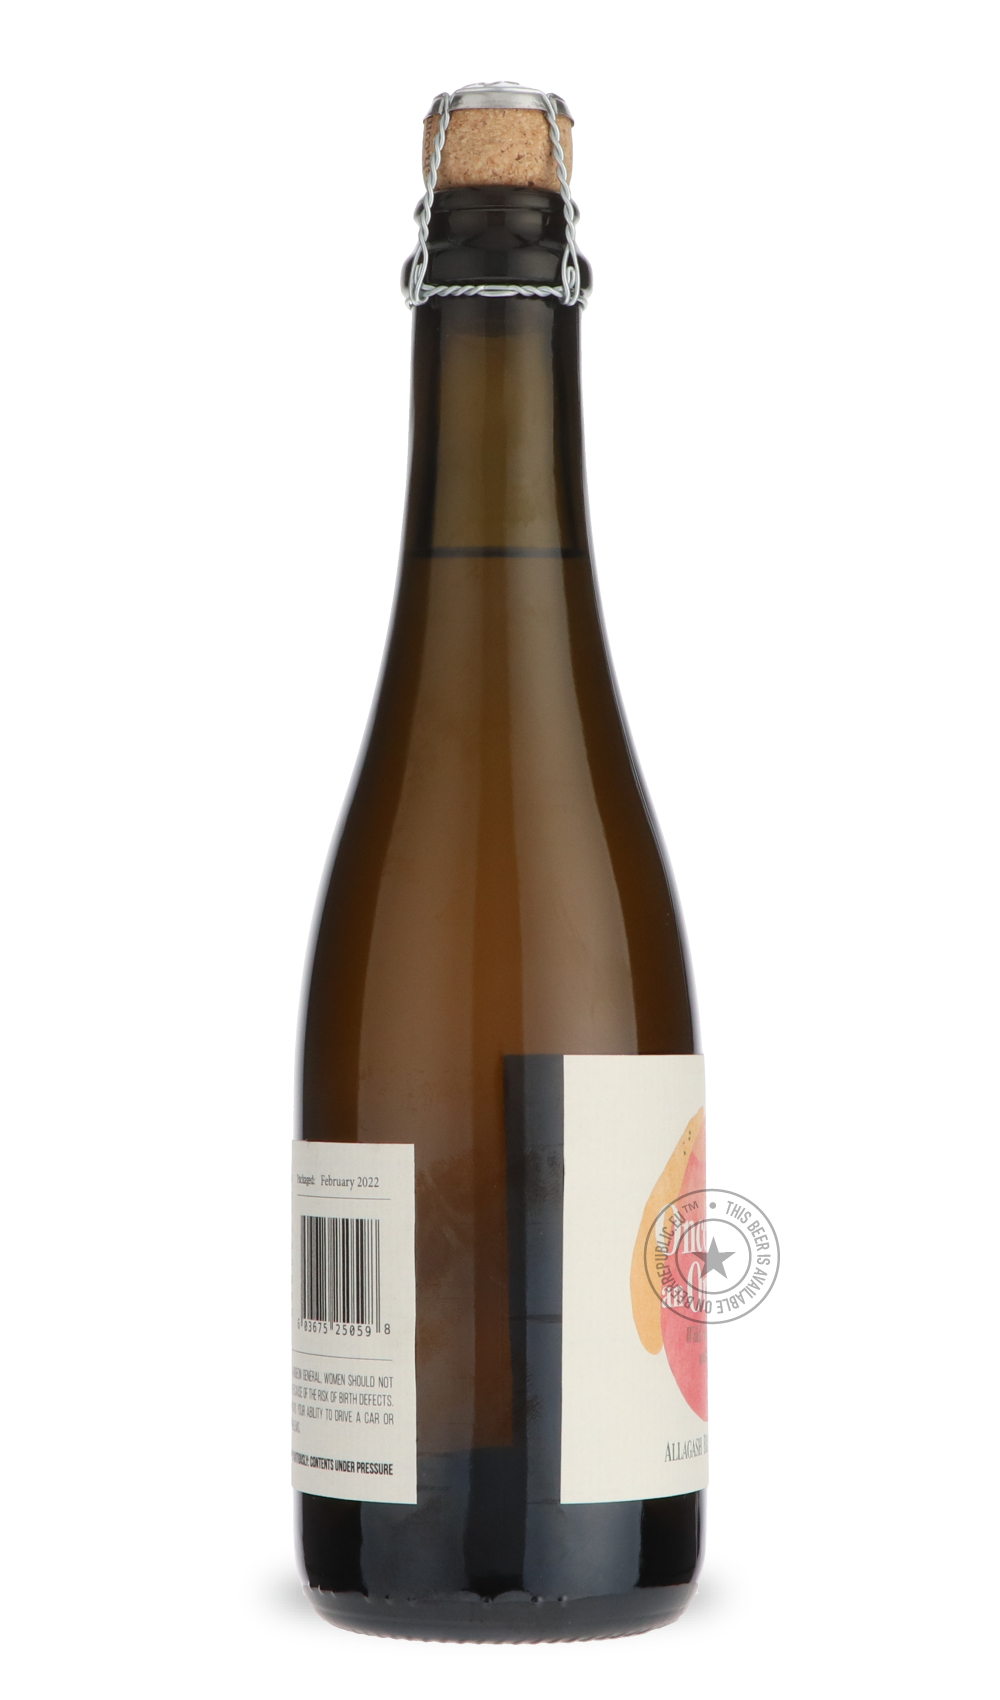 -Allagash- Once Upon An Orchard - Peach-Sour / Wild & Fruity- Only @ Beer Republic - The best online beer store for American & Canadian craft beer - Buy beer online from the USA and Canada - Bier online kopen - Amerikaans bier kopen - Craft beer store - Craft beer kopen - Amerikanisch bier kaufen - Bier online kaufen - Acheter biere online - IPA - Stout - Porter - New England IPA - Hazy IPA - Imperial Stout - Barrel Aged - Barrel Aged Imperial Stout - Brown - Dark beer - Blond - Blonde - Pilsner - Lager - W